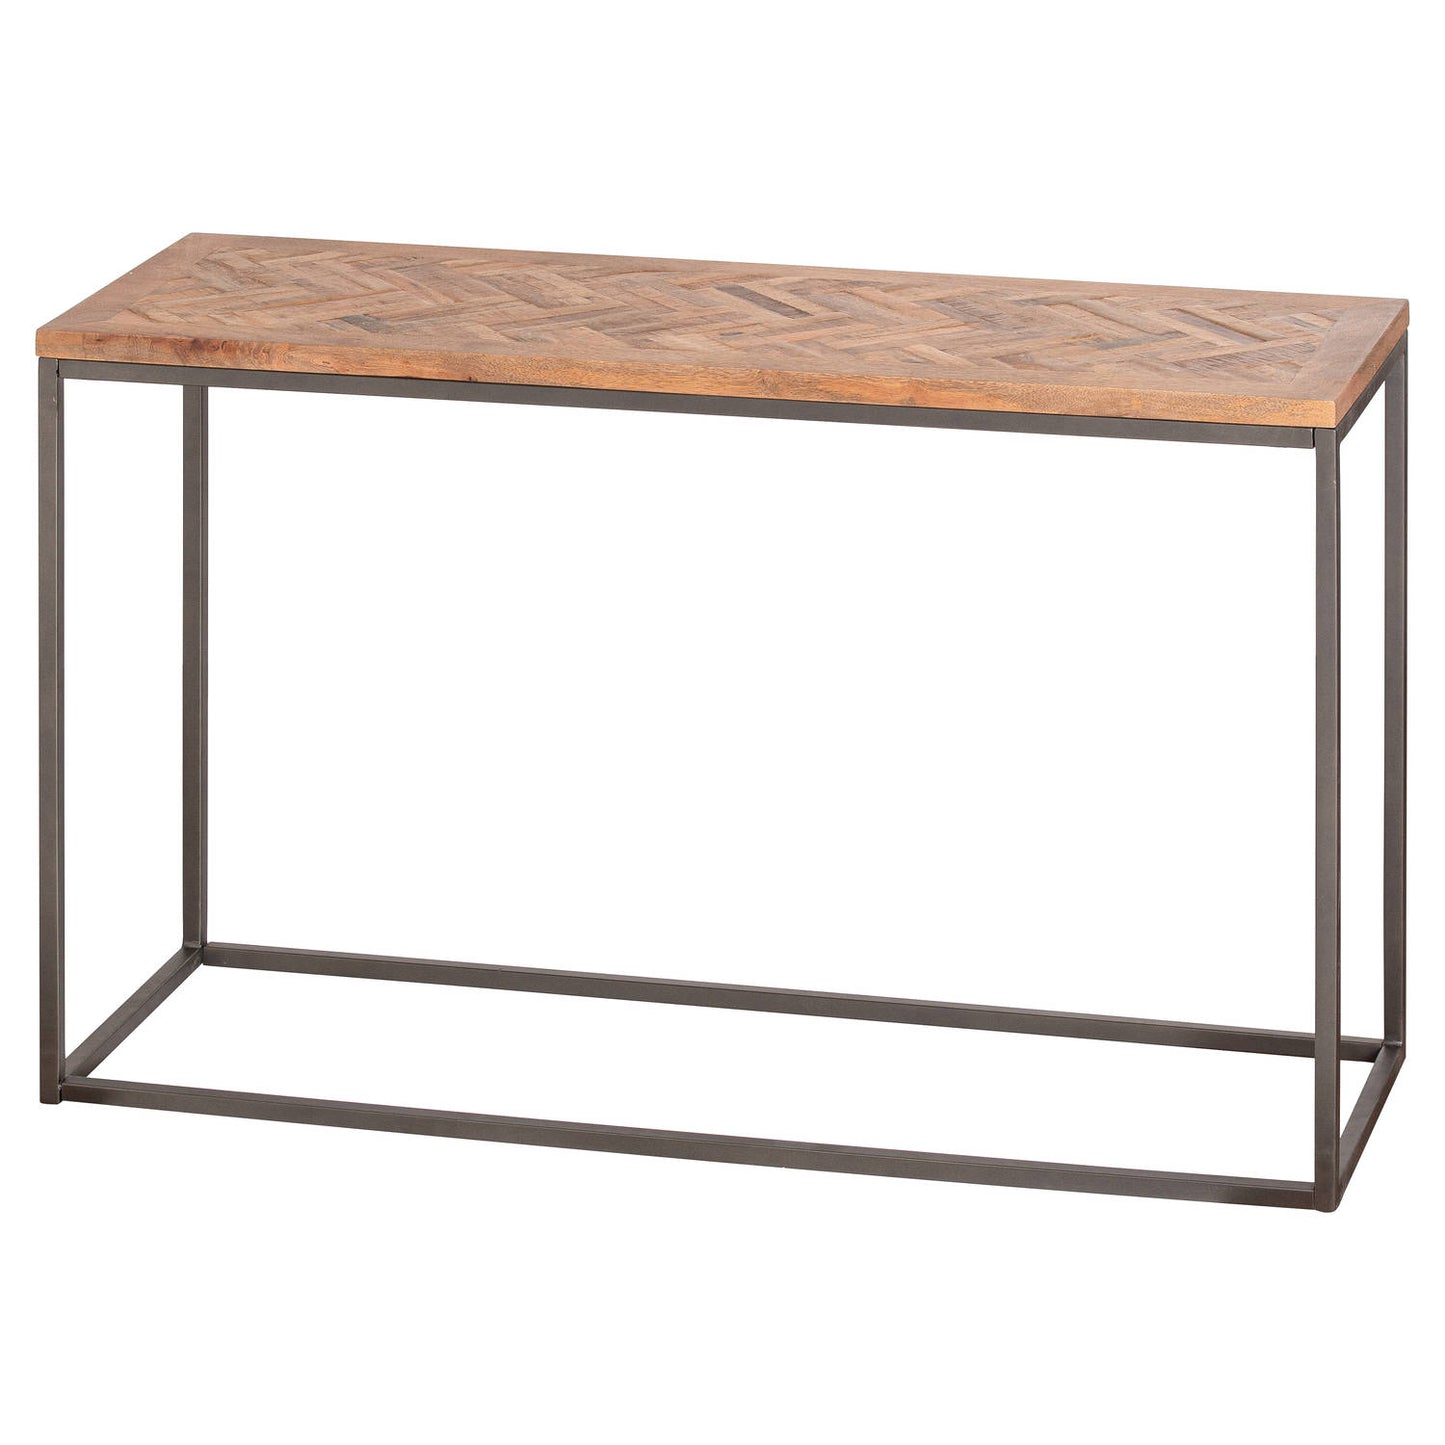 Hoxton Collection Console Table With Parquet Top